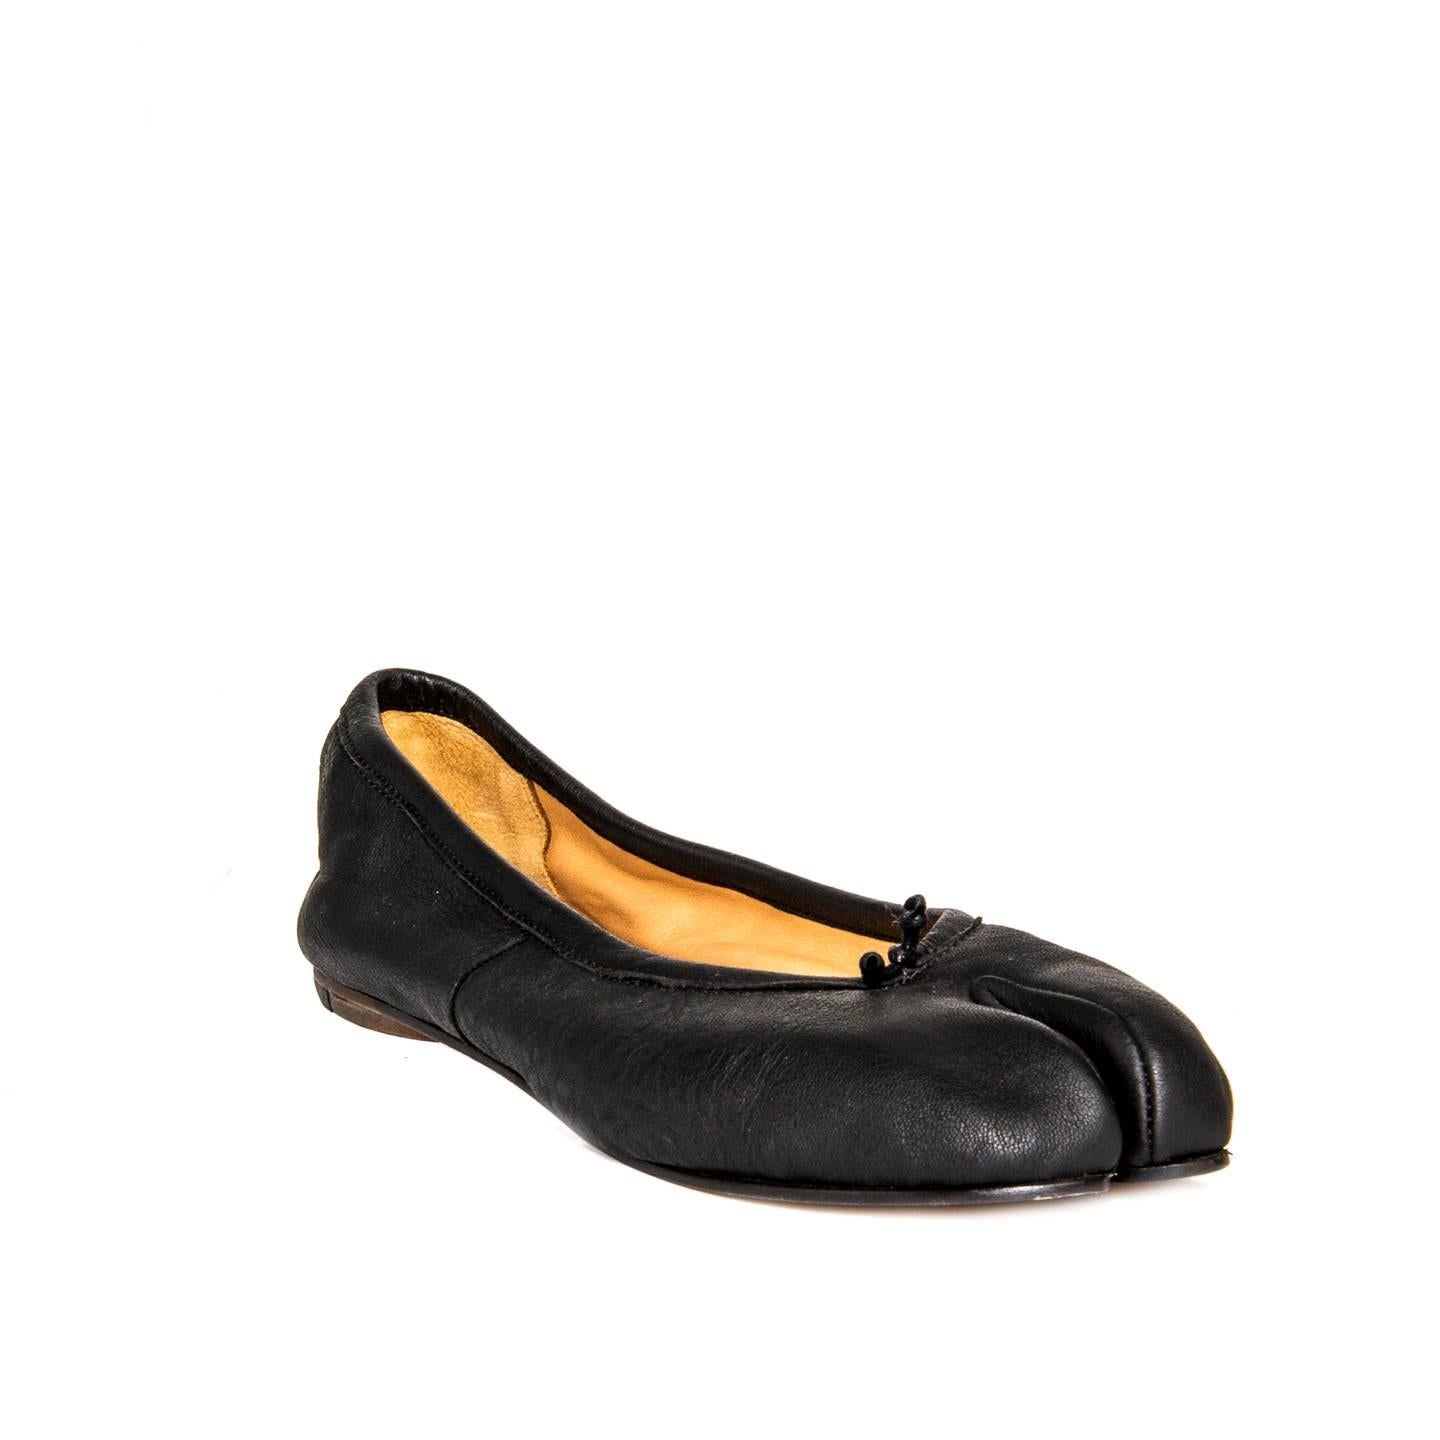 Black leather tabi ballet flats. Vero cuoio. Made in Italy. 

Size  40.5 Italian sizing 

Condition  Excellent: never worn